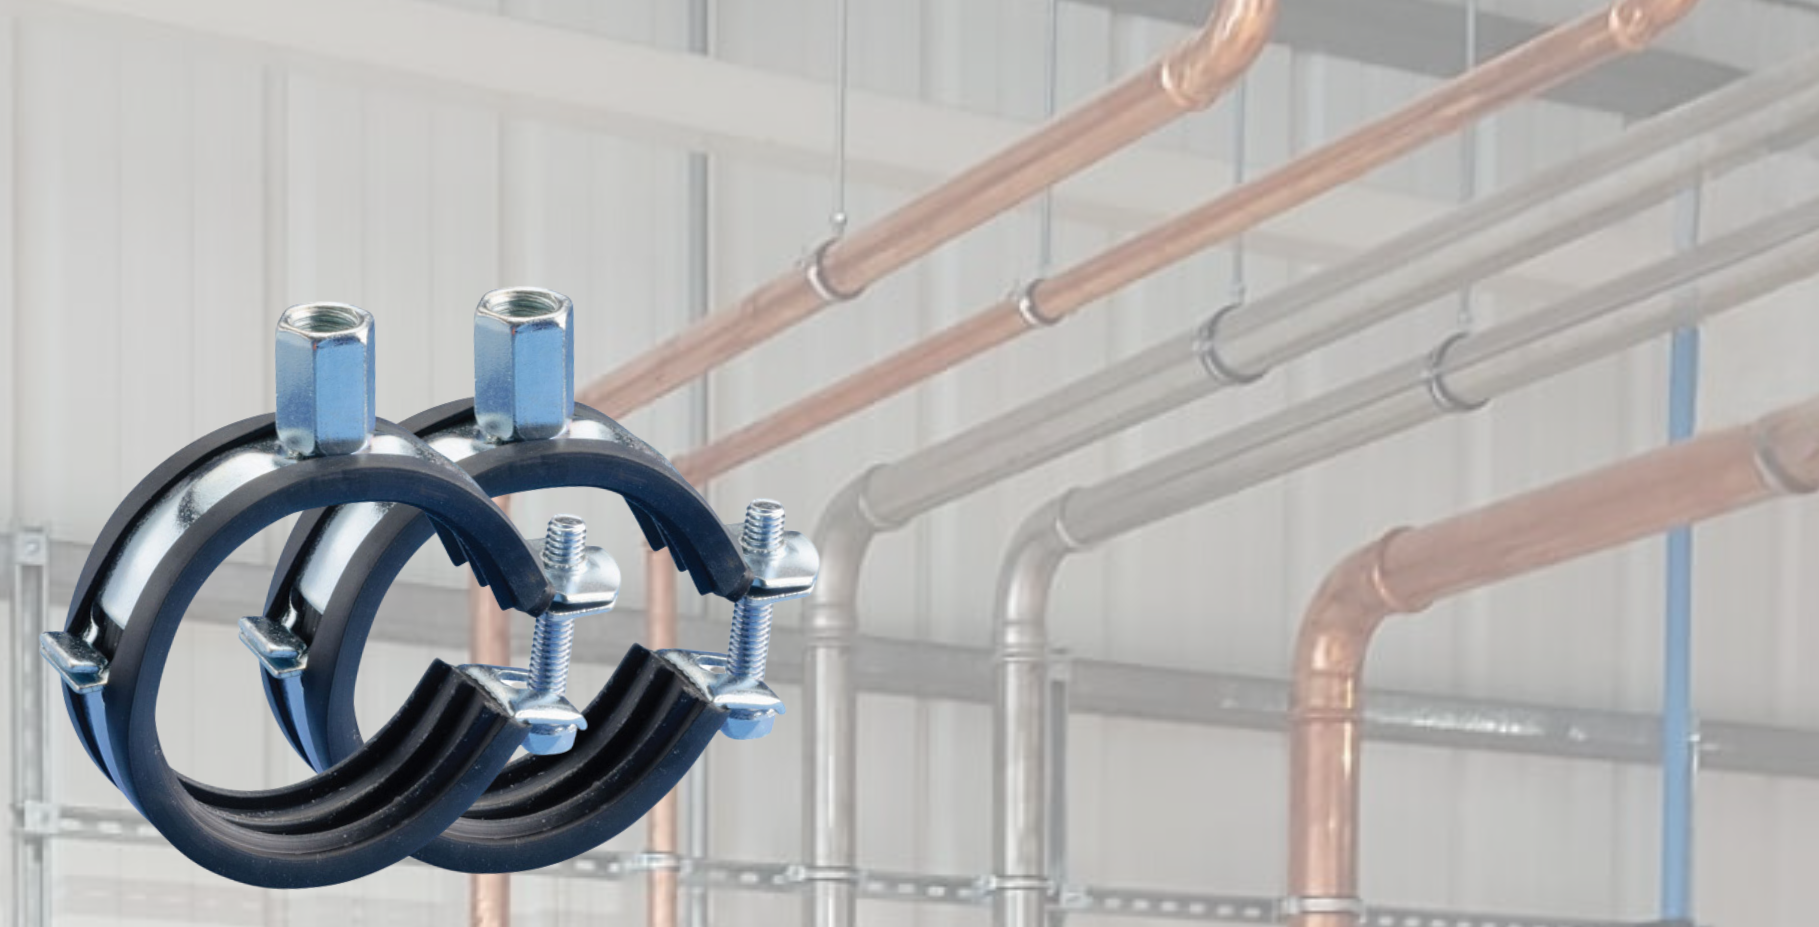 Product Advice: Lined & unlined pipe clamps